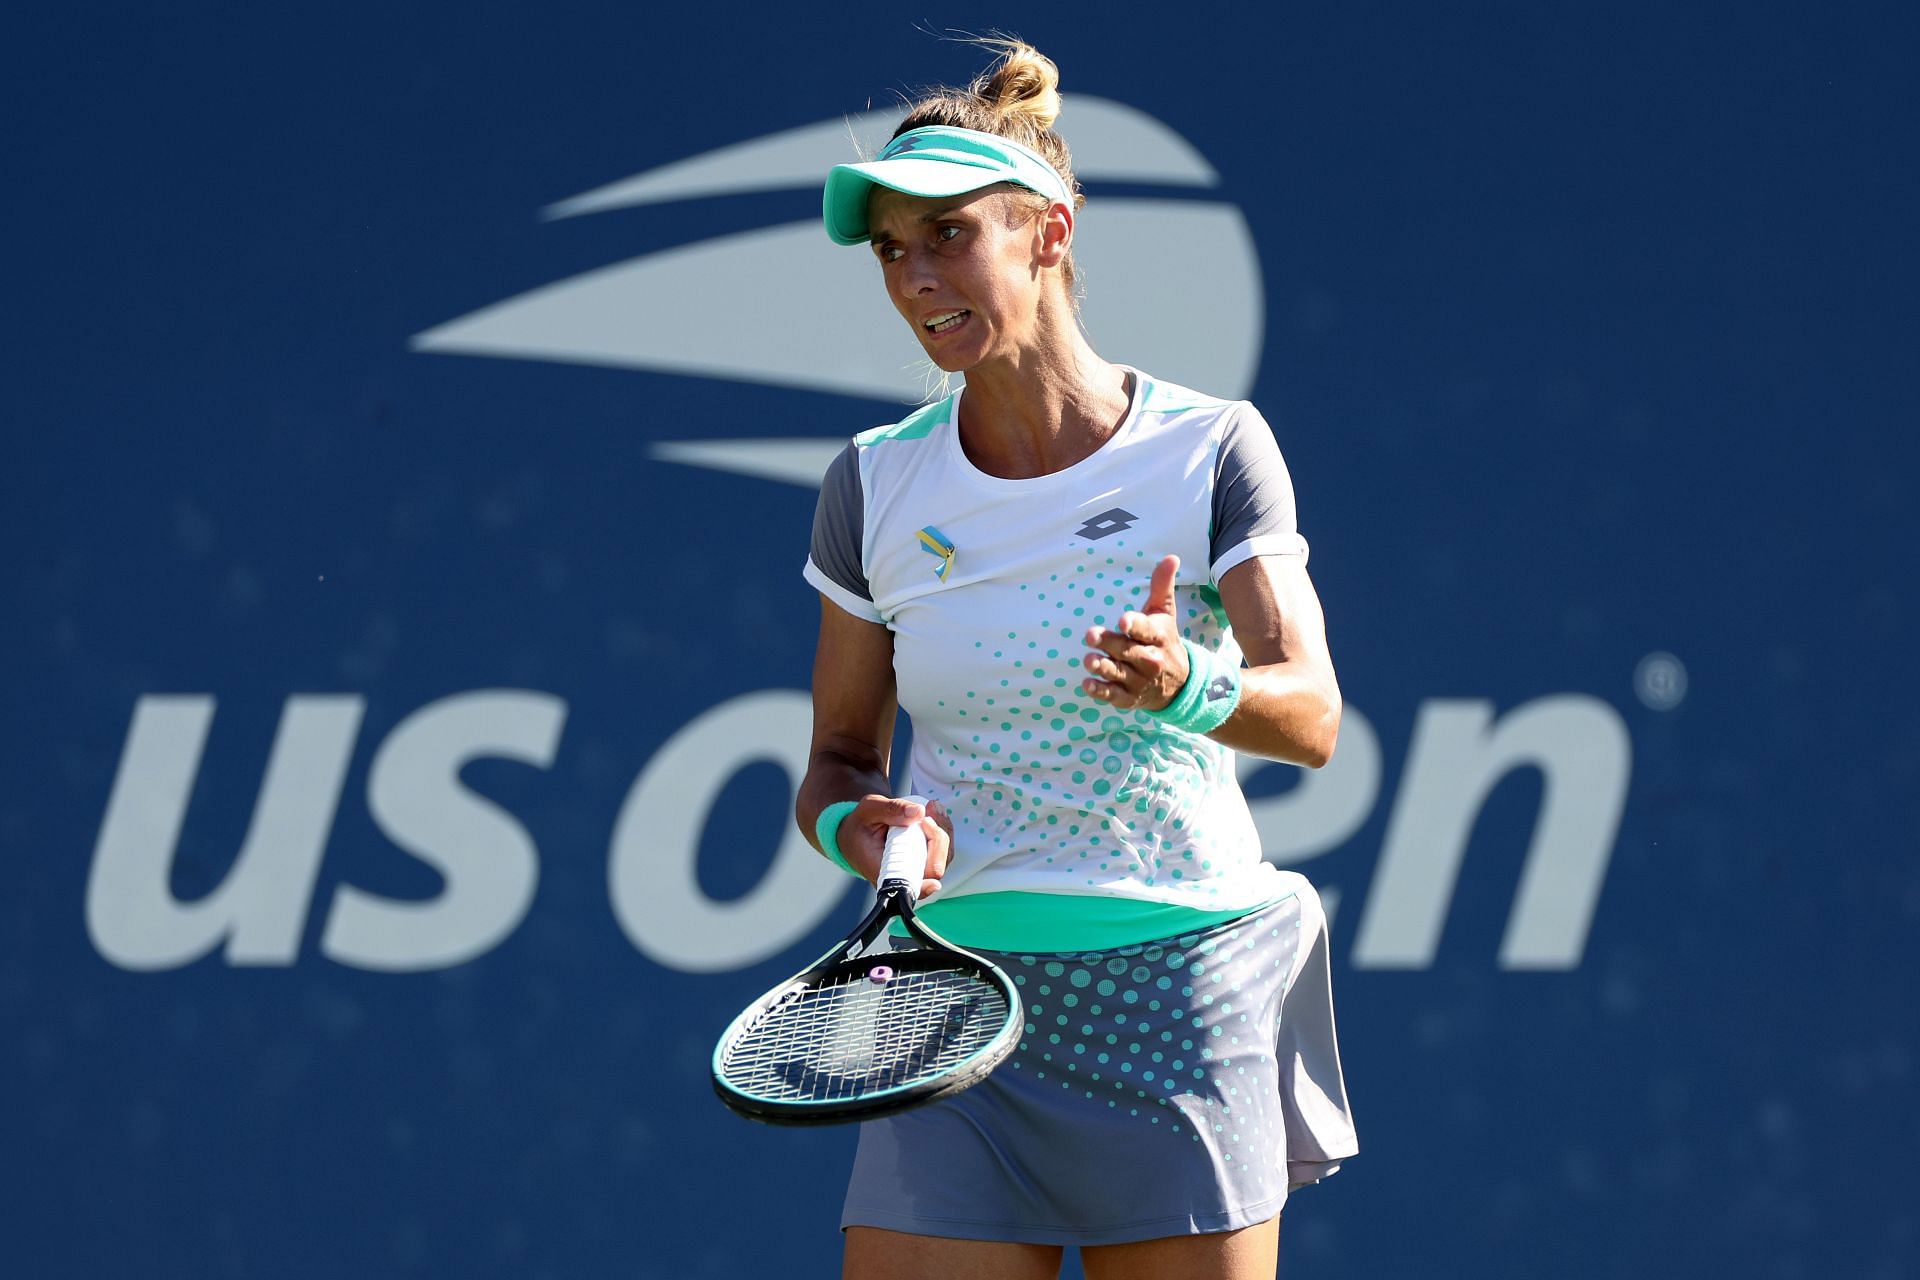 Lesia Tsurenko reacts during a point at the 2022 US Open